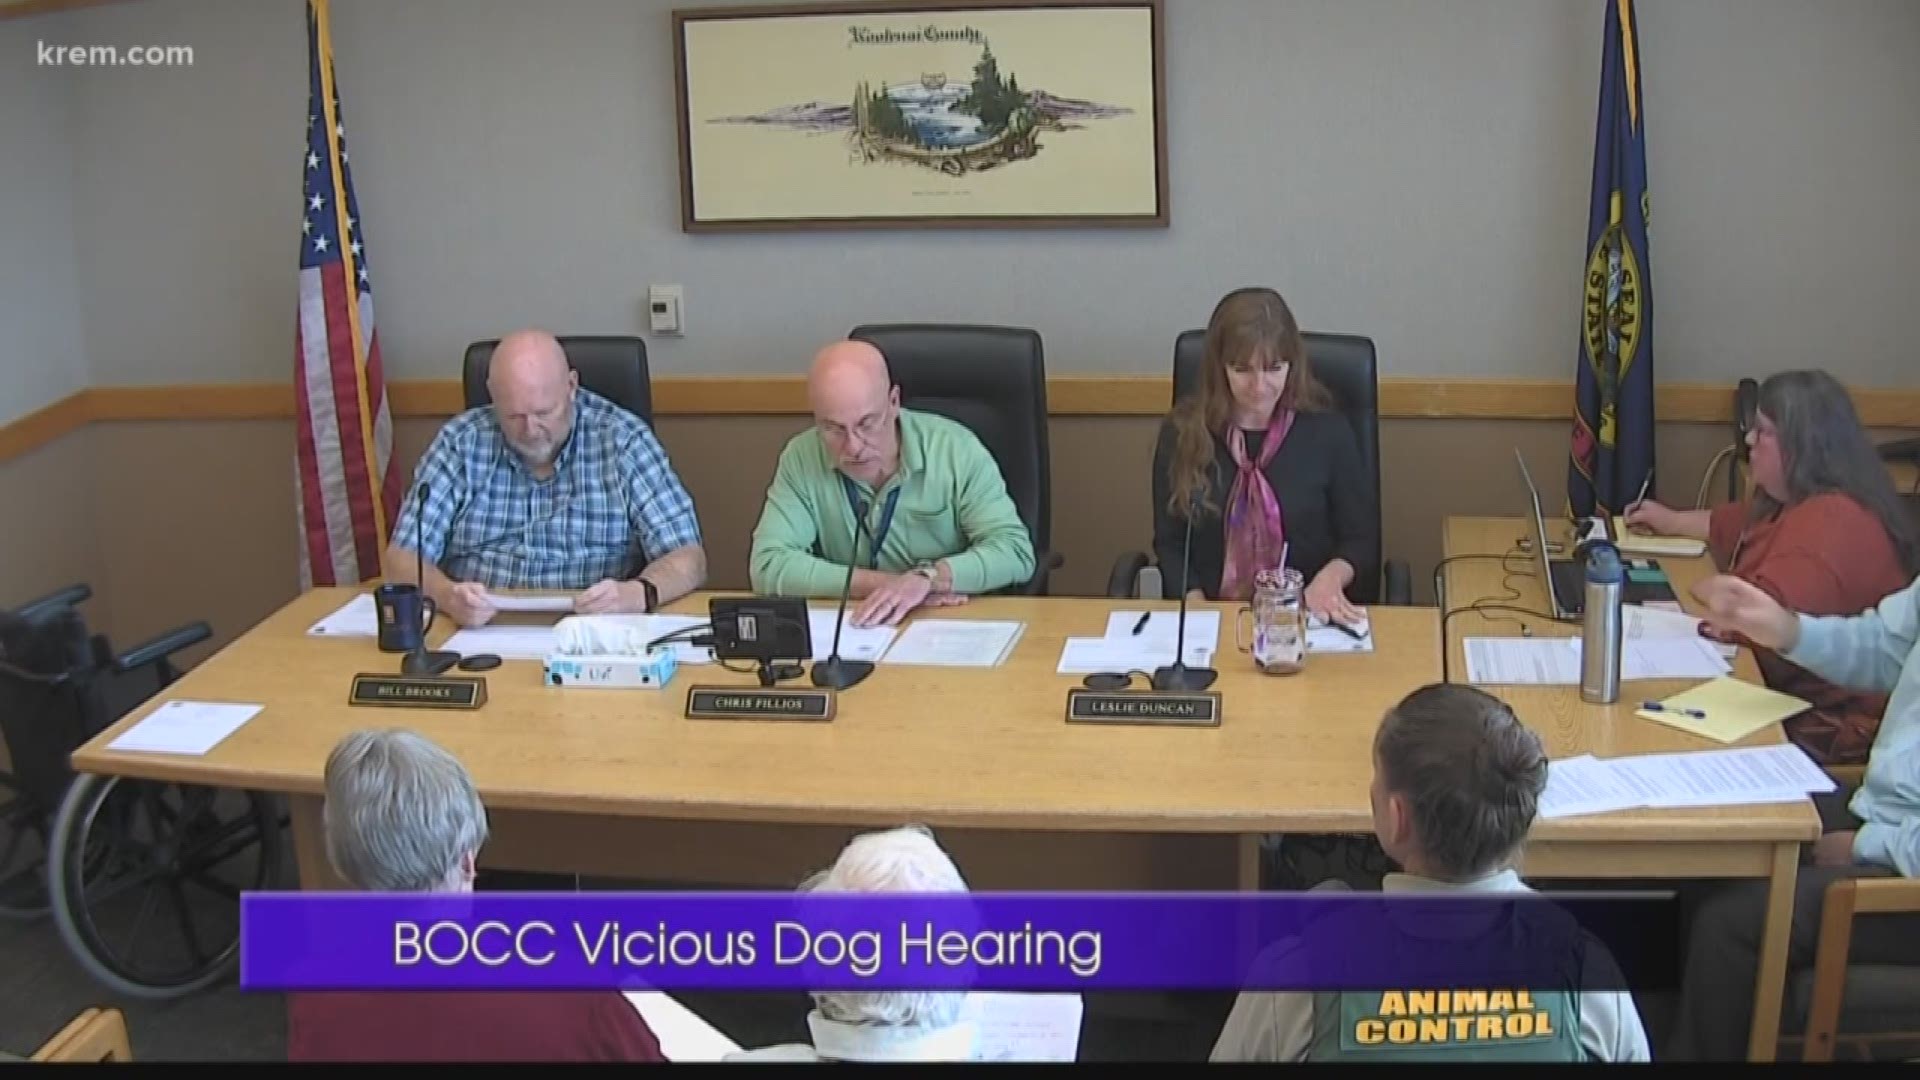 A dog that has ran free multiple times must have new owners in two weeks or it will be put down. The case was decided by Kootenai County Commissioners.